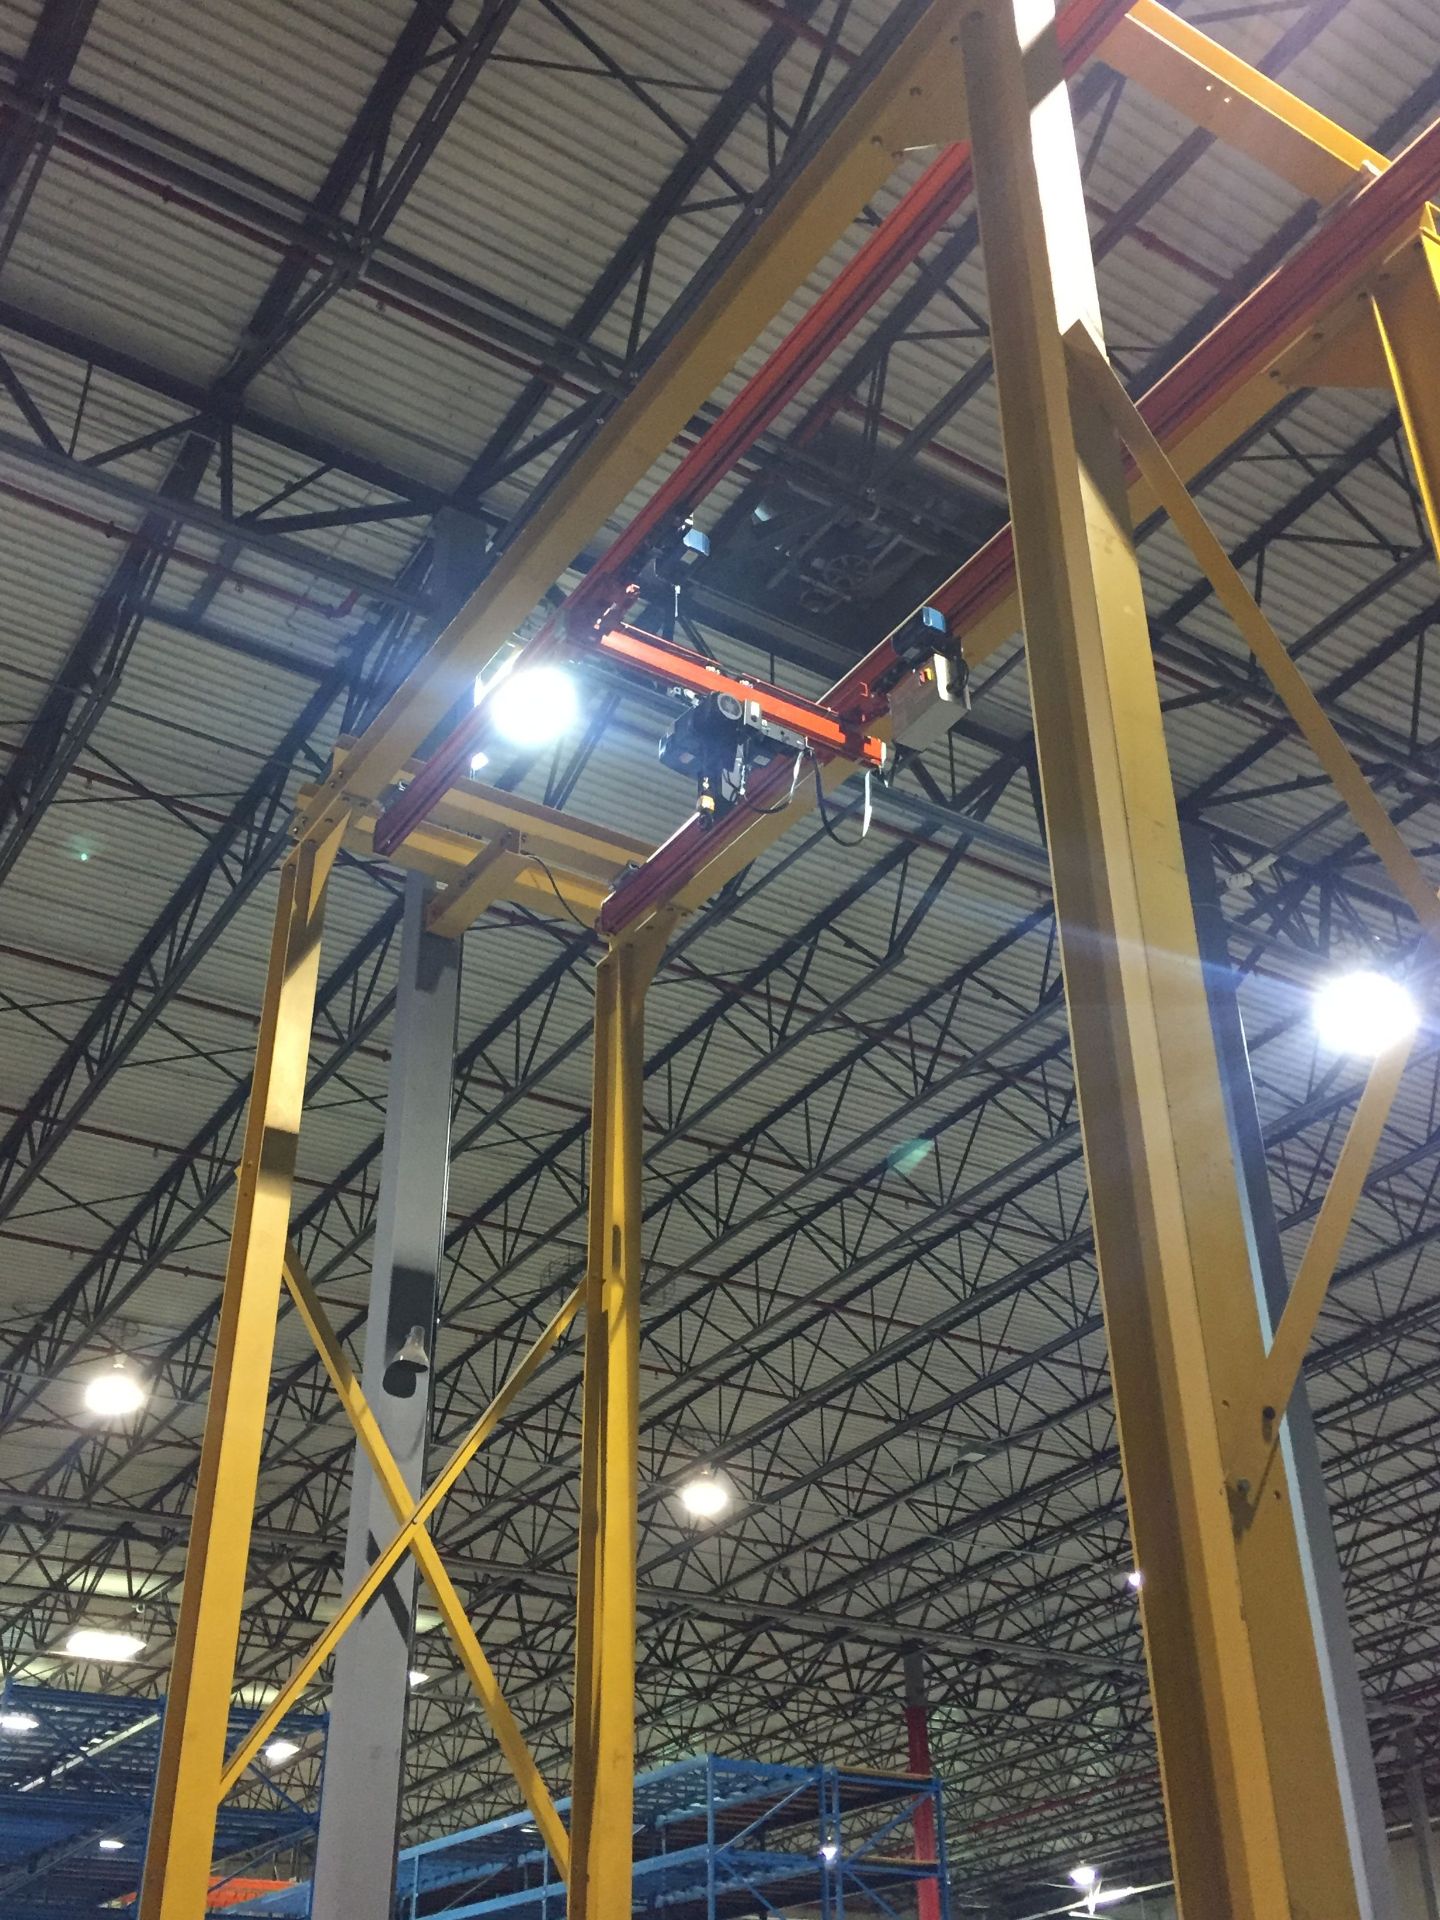 2,200 LB. CAPACITY DEMAG FREE STANDING REMOTE CONTROL CHAIN HOIST CRANE SYSTEM (APPROX.) 8' X 23' - Image 2 of 3